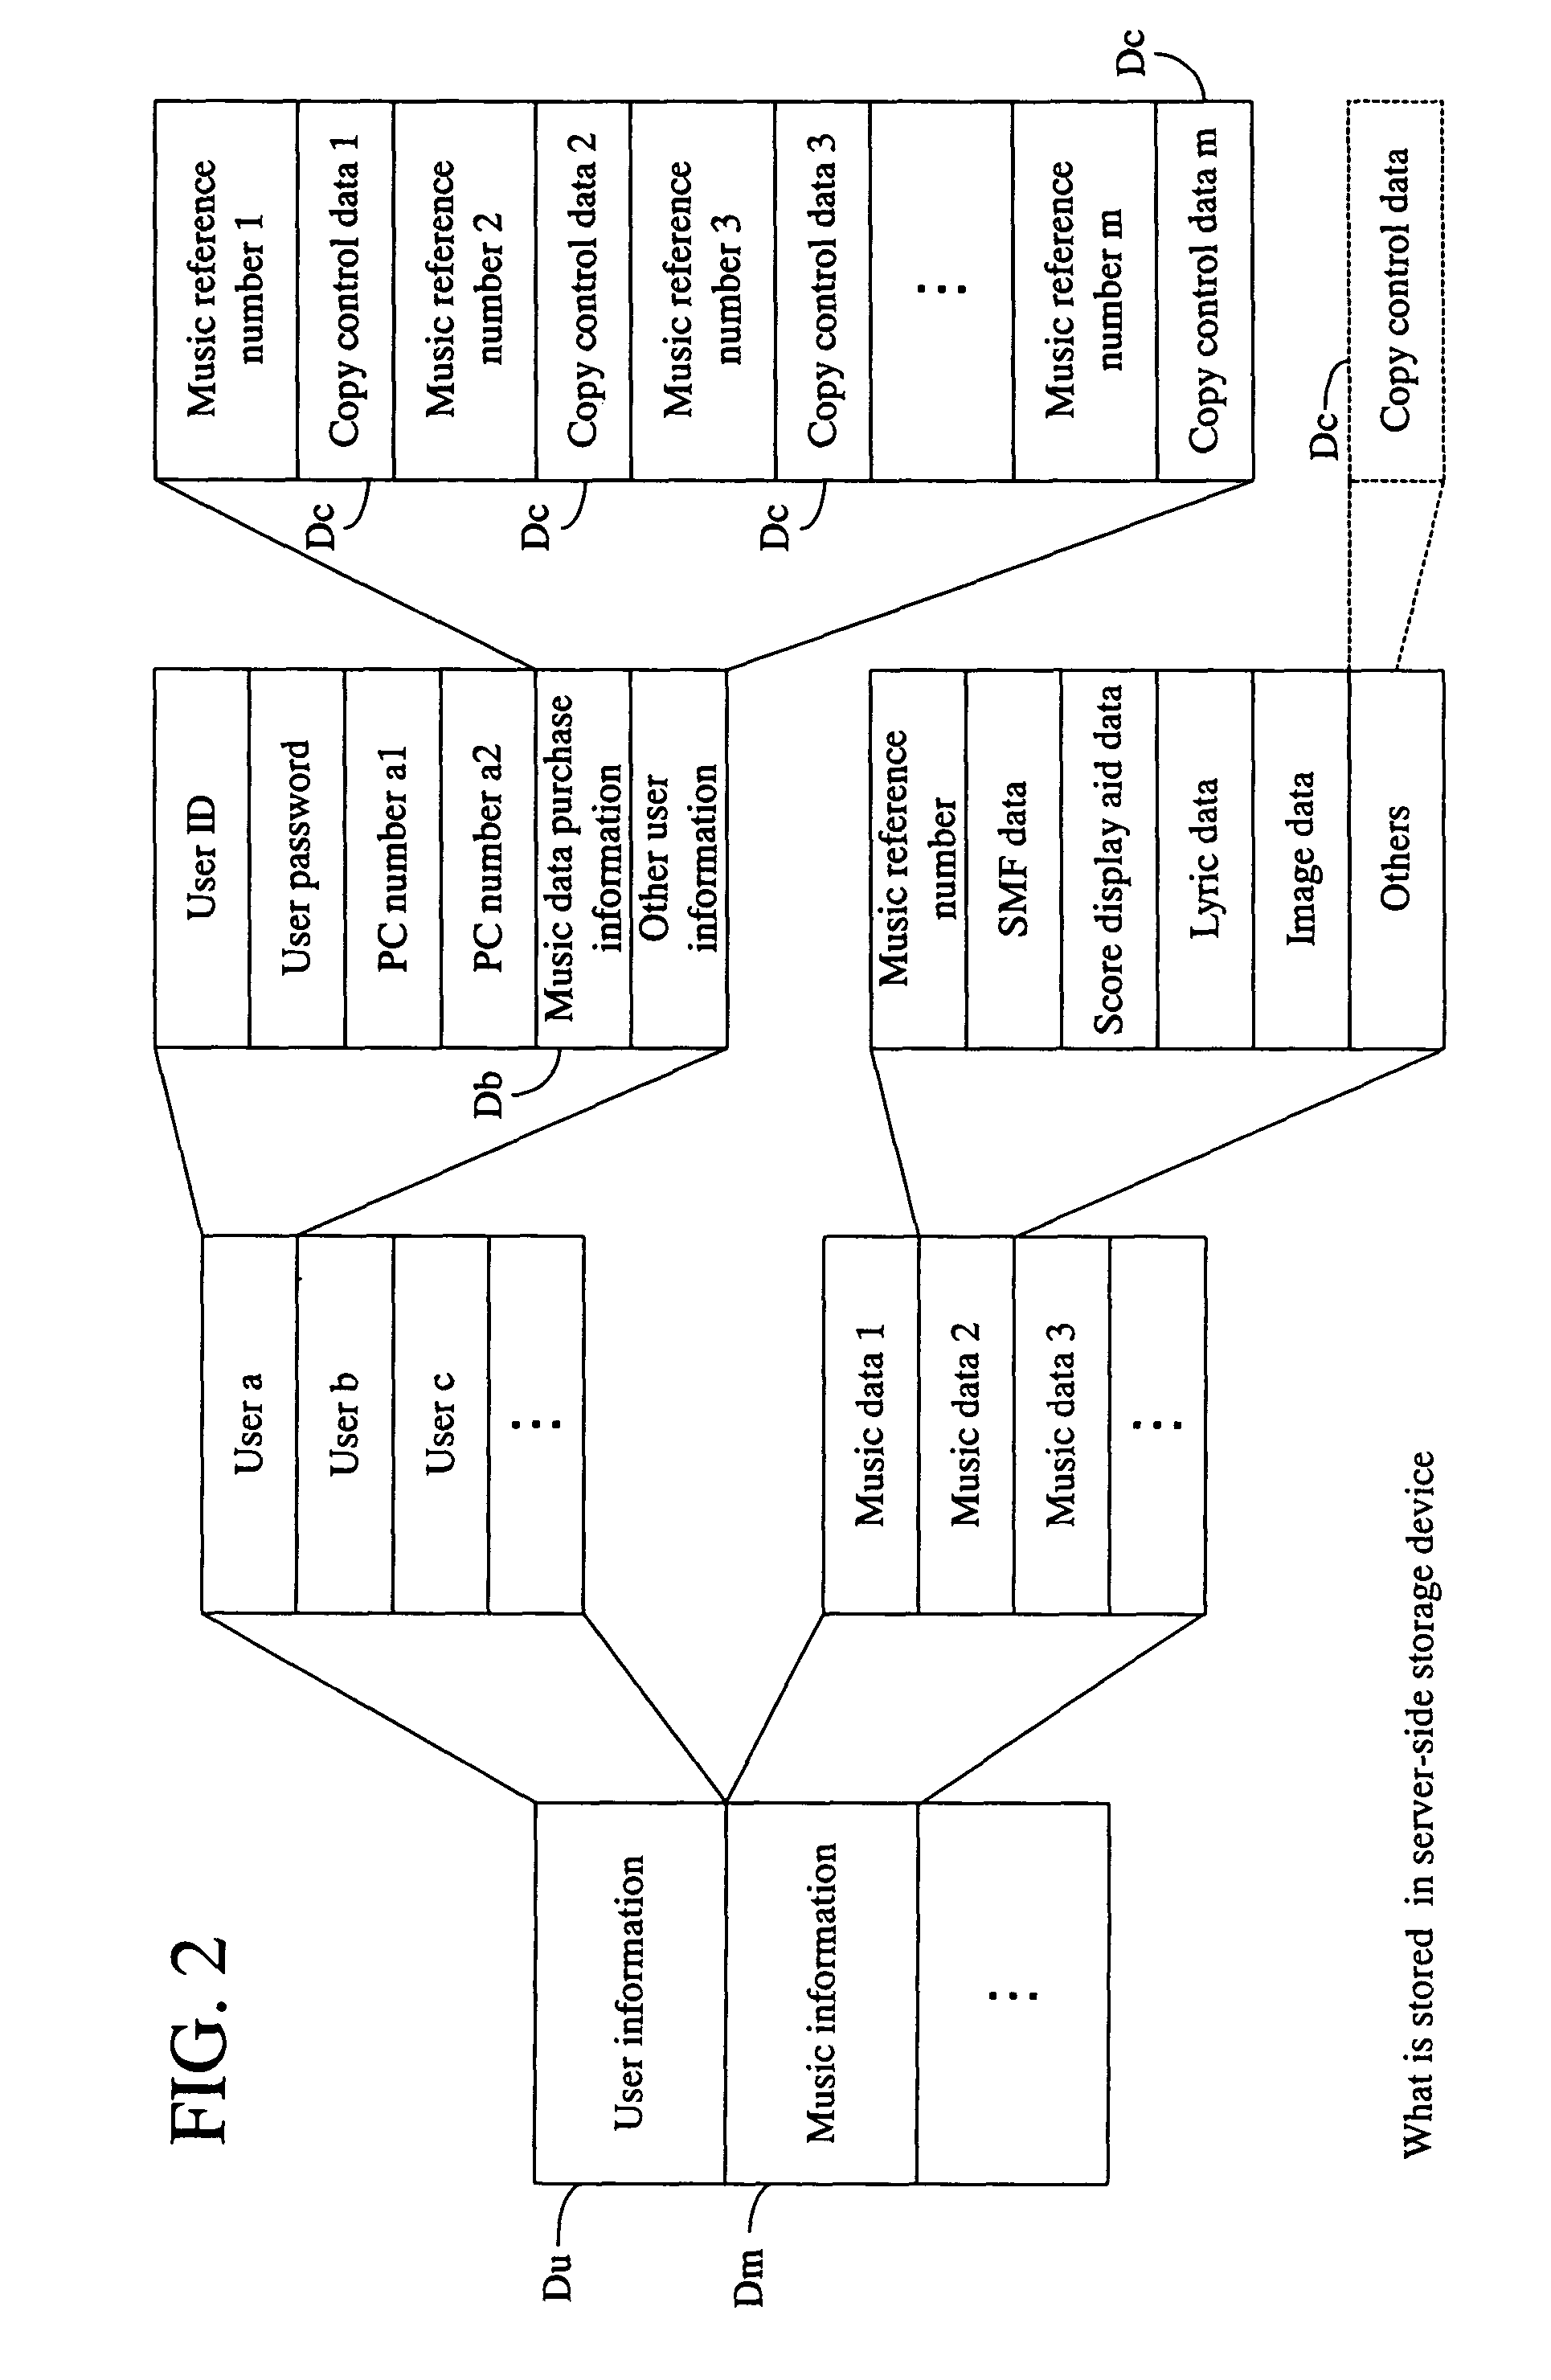 Contents supplying system